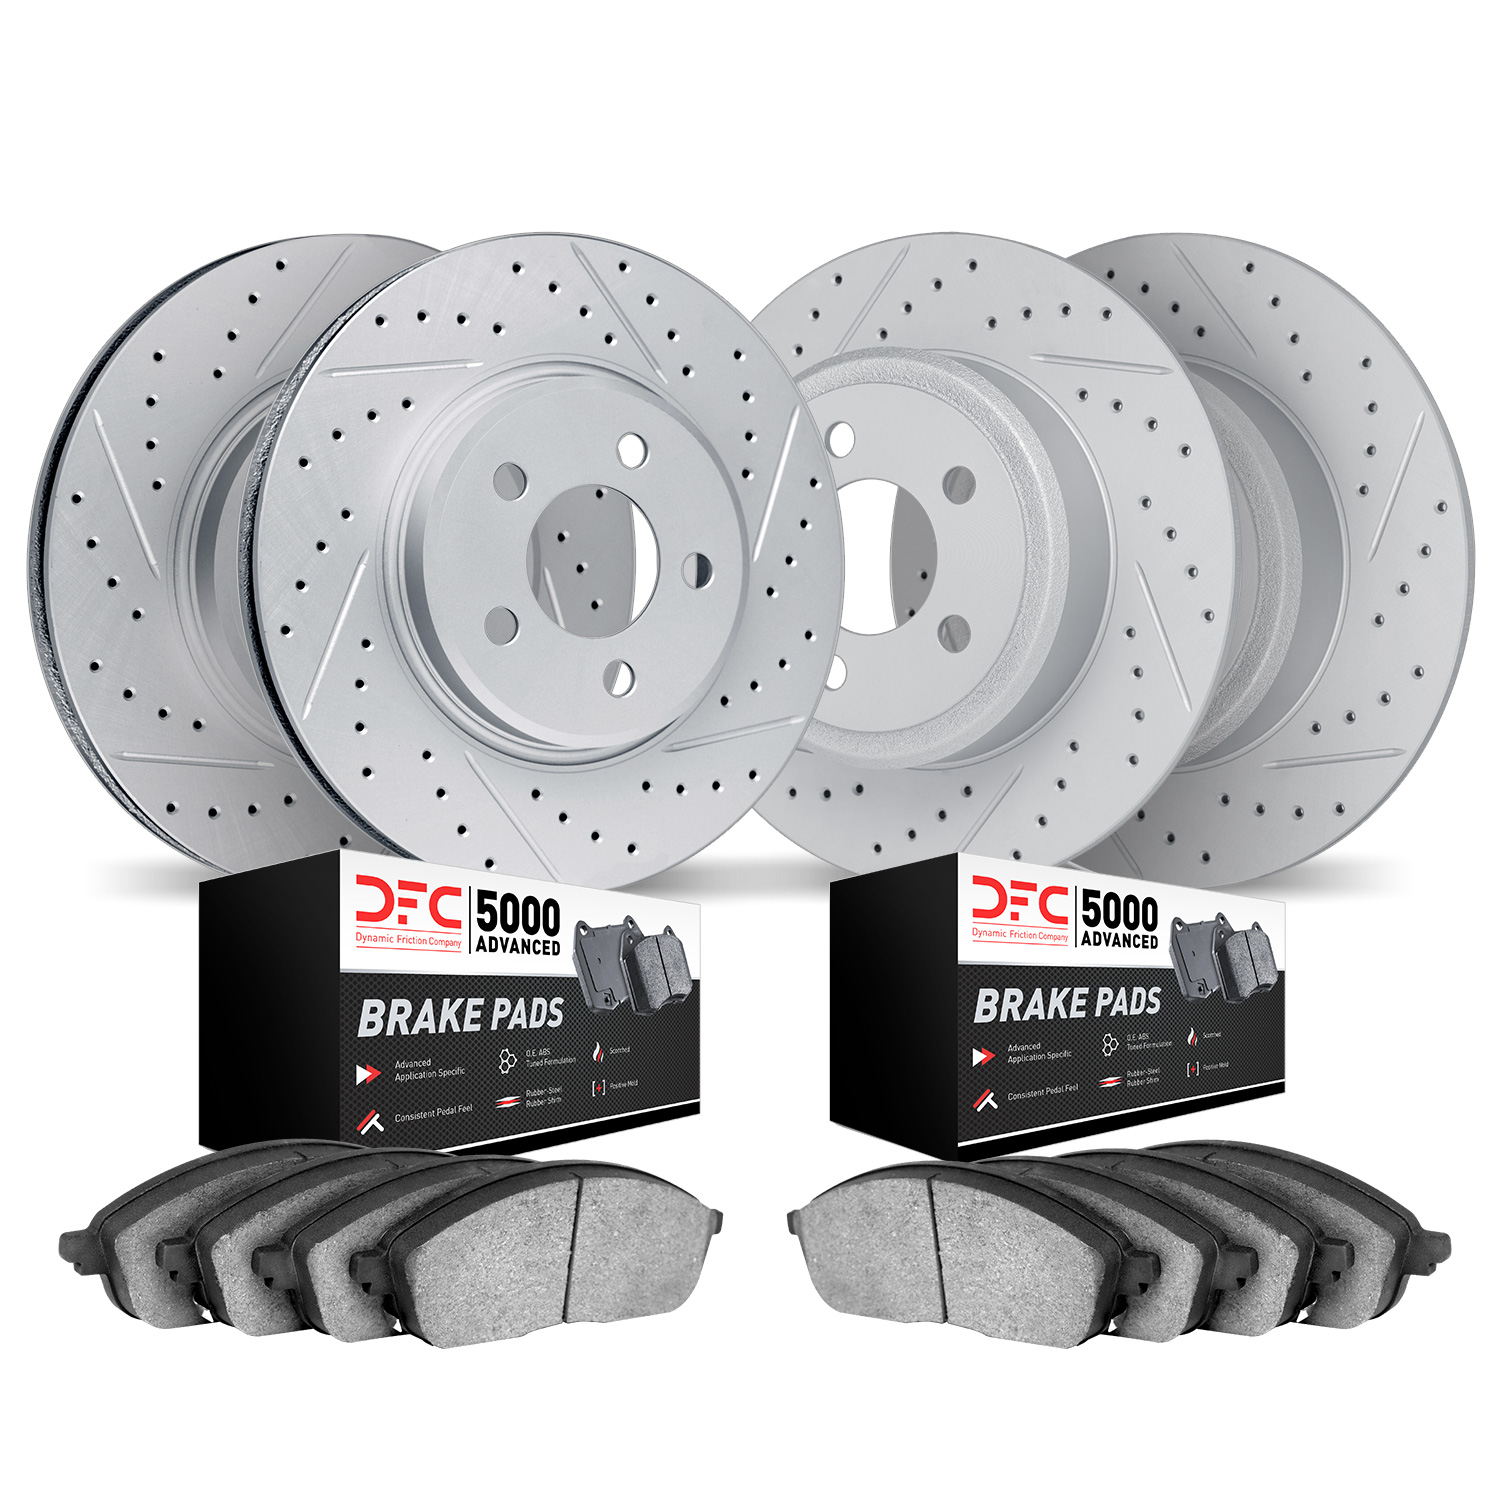 2504-42060 Geoperformance Drilled/Slotted Rotors w/5000 Advanced Brake Pads Kit, Fits Select Mopar, Position: Front and Rear